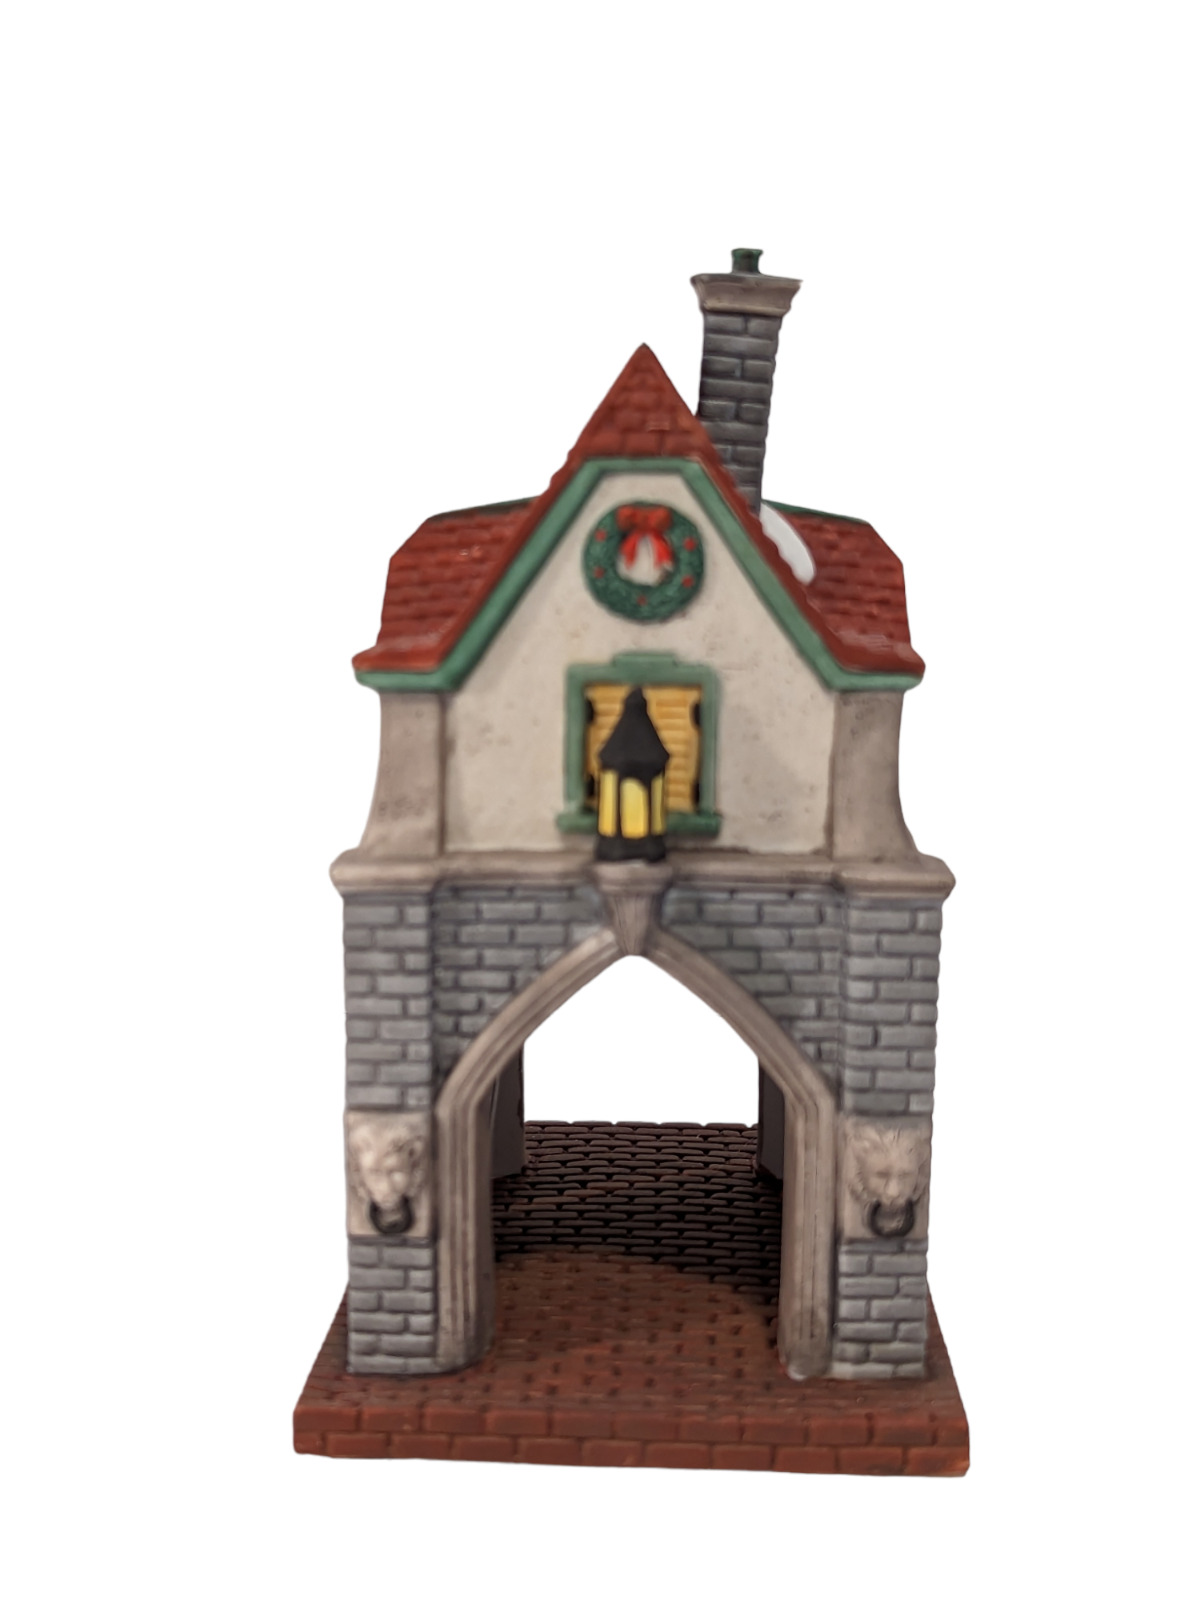 DEPT 56 GATE HOUSE, HERITAGE VILLAGE COLLECTION  #55301 1992 Retired